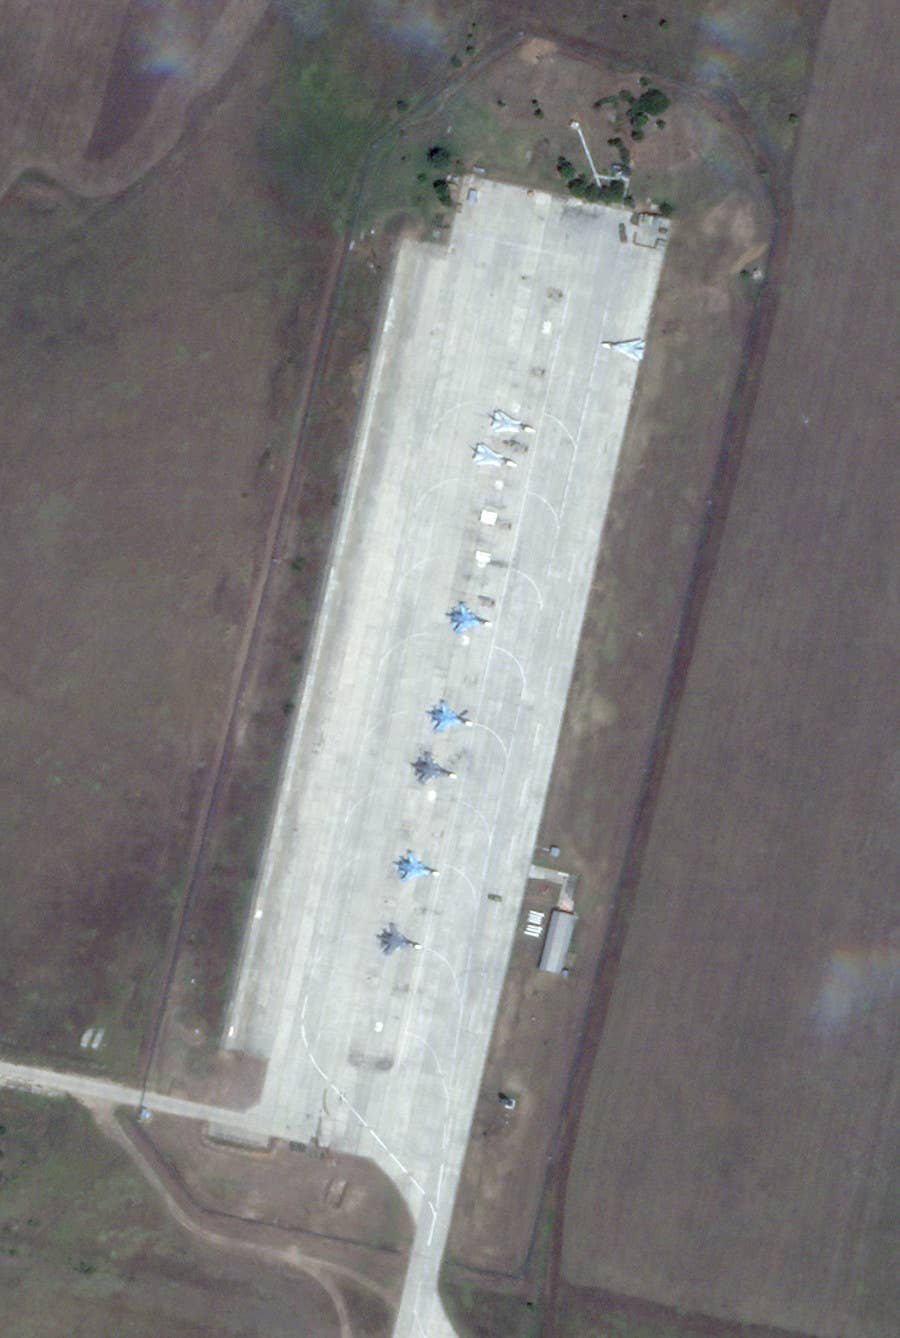 The other large apron at Gvardeyskoe looking untouched in the August 17 image. <em>PHOTO © 2022 PLANET LABS INC. ALL RIGHTS RESERVED. REPRINTED BY PERMISSION</em>